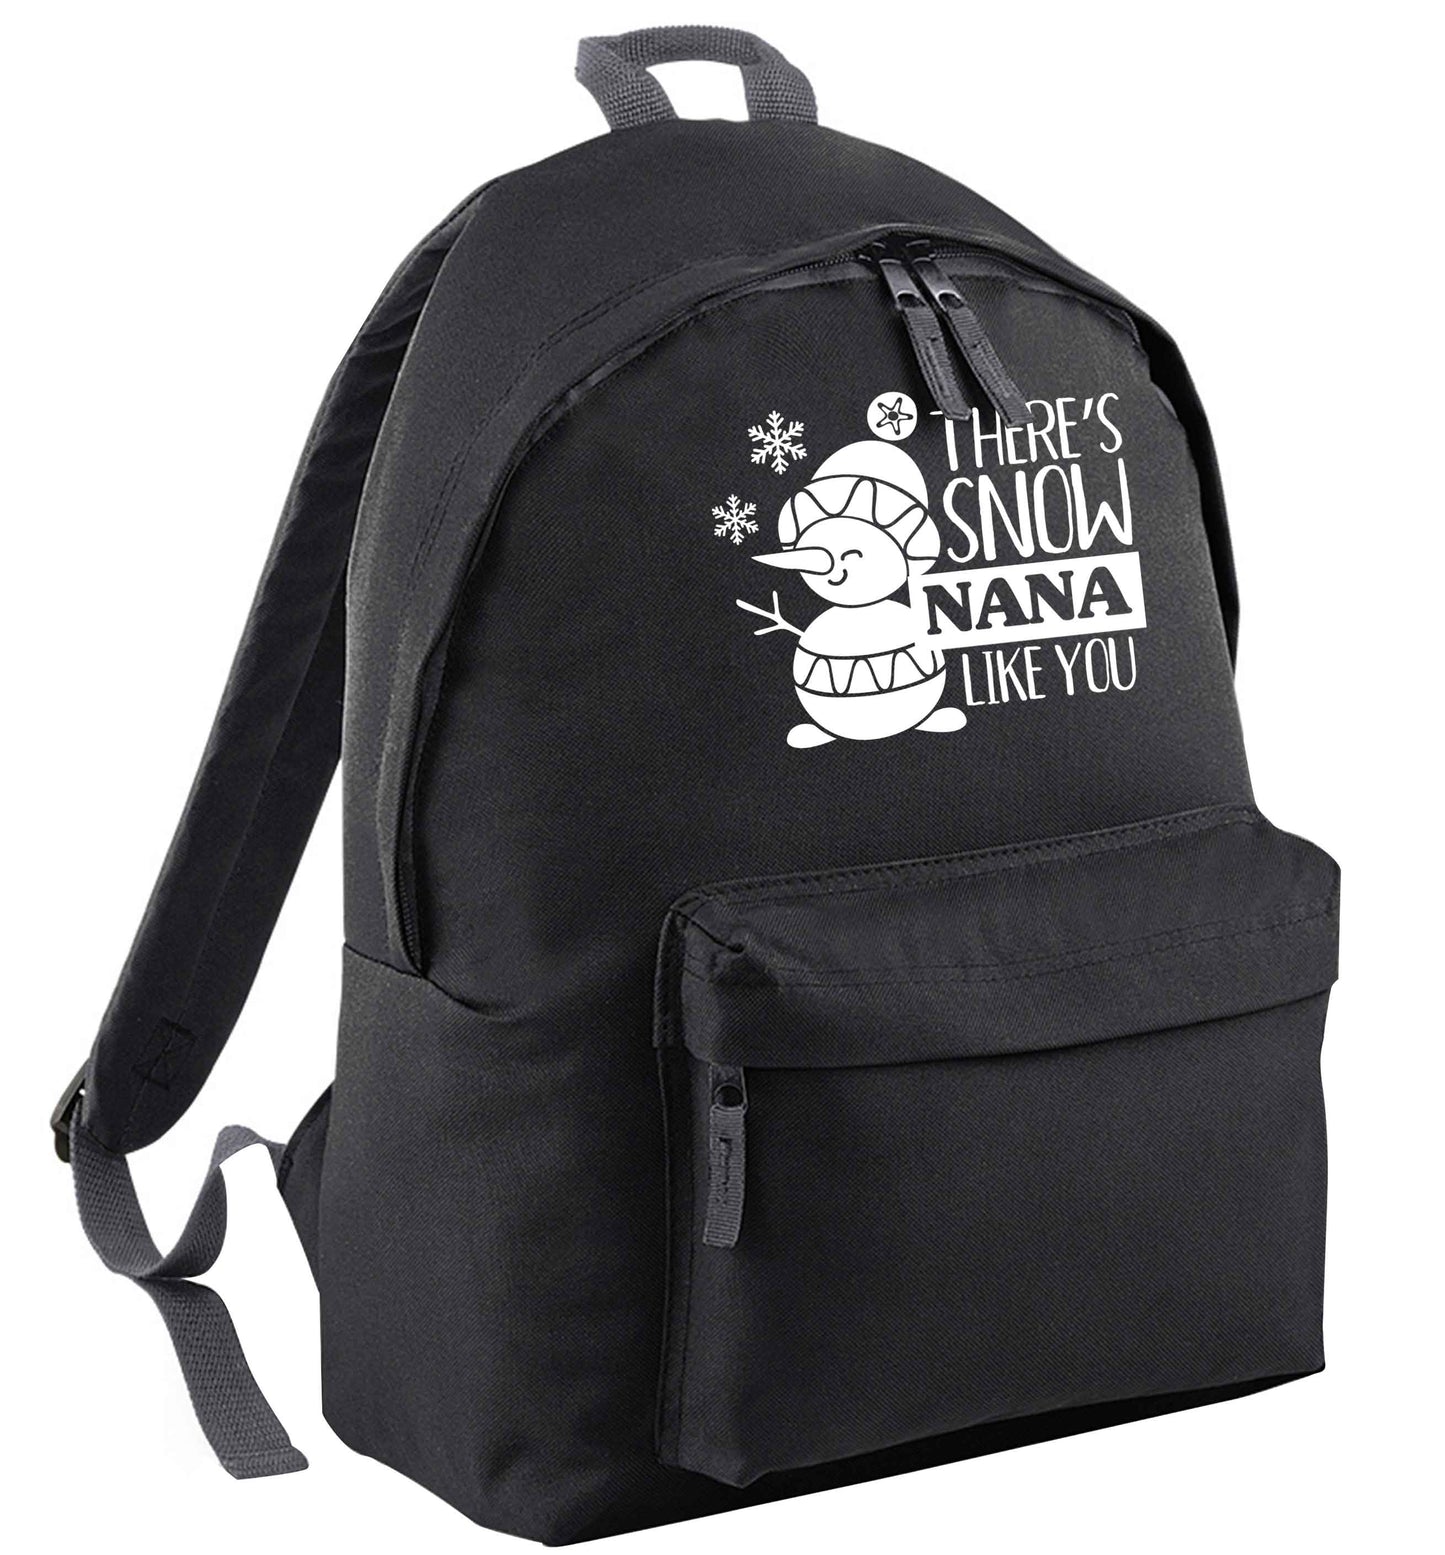 There's snow nana like you | Children's backpack